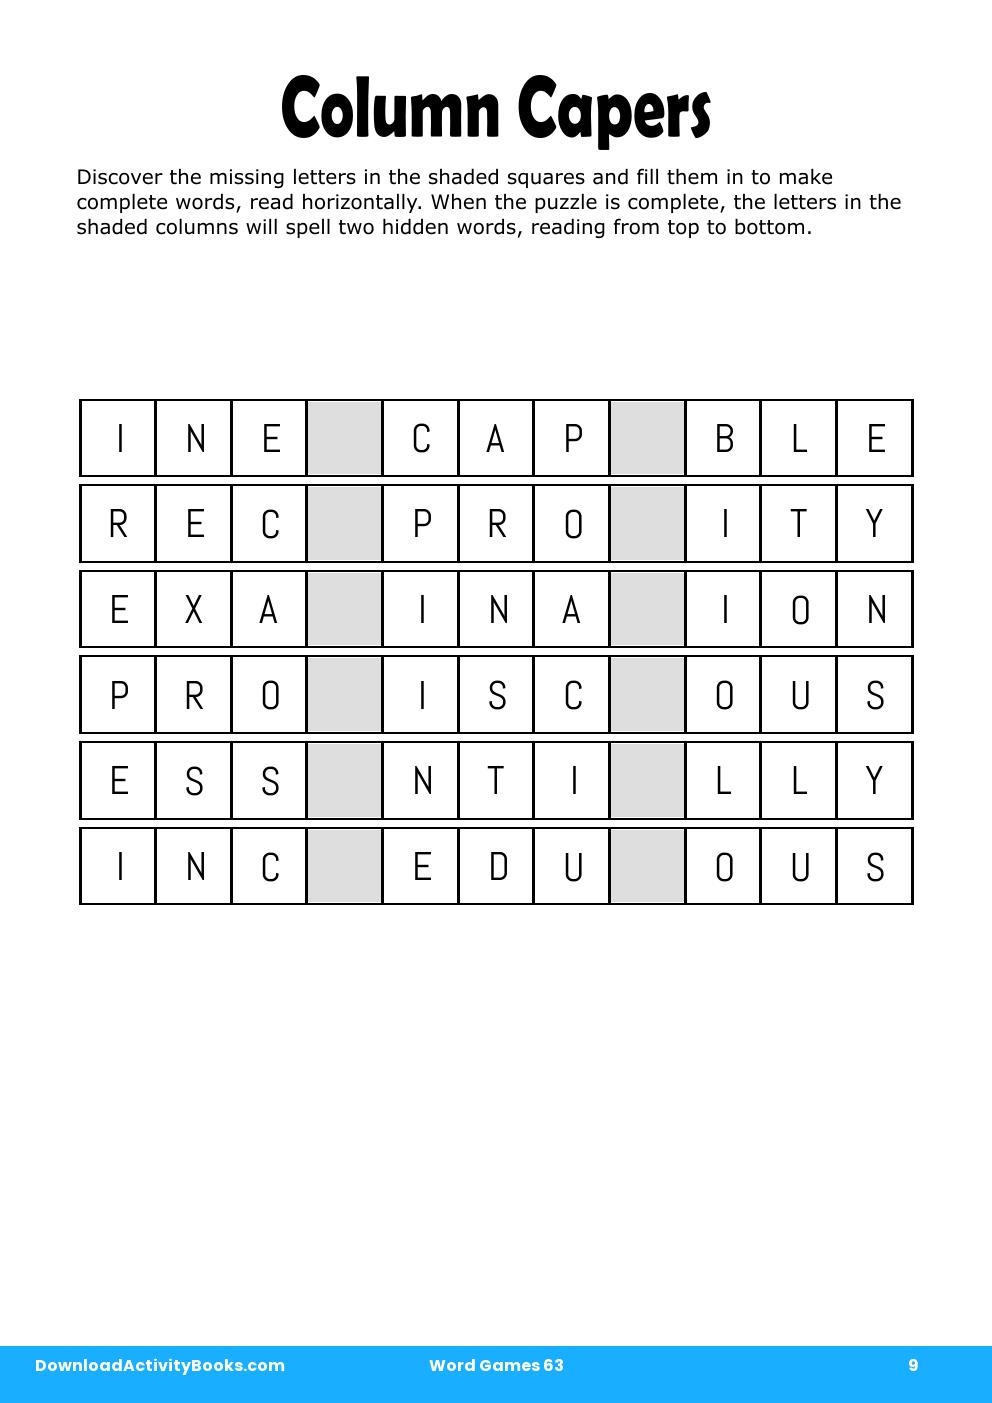 Column Capers in Word Games 63